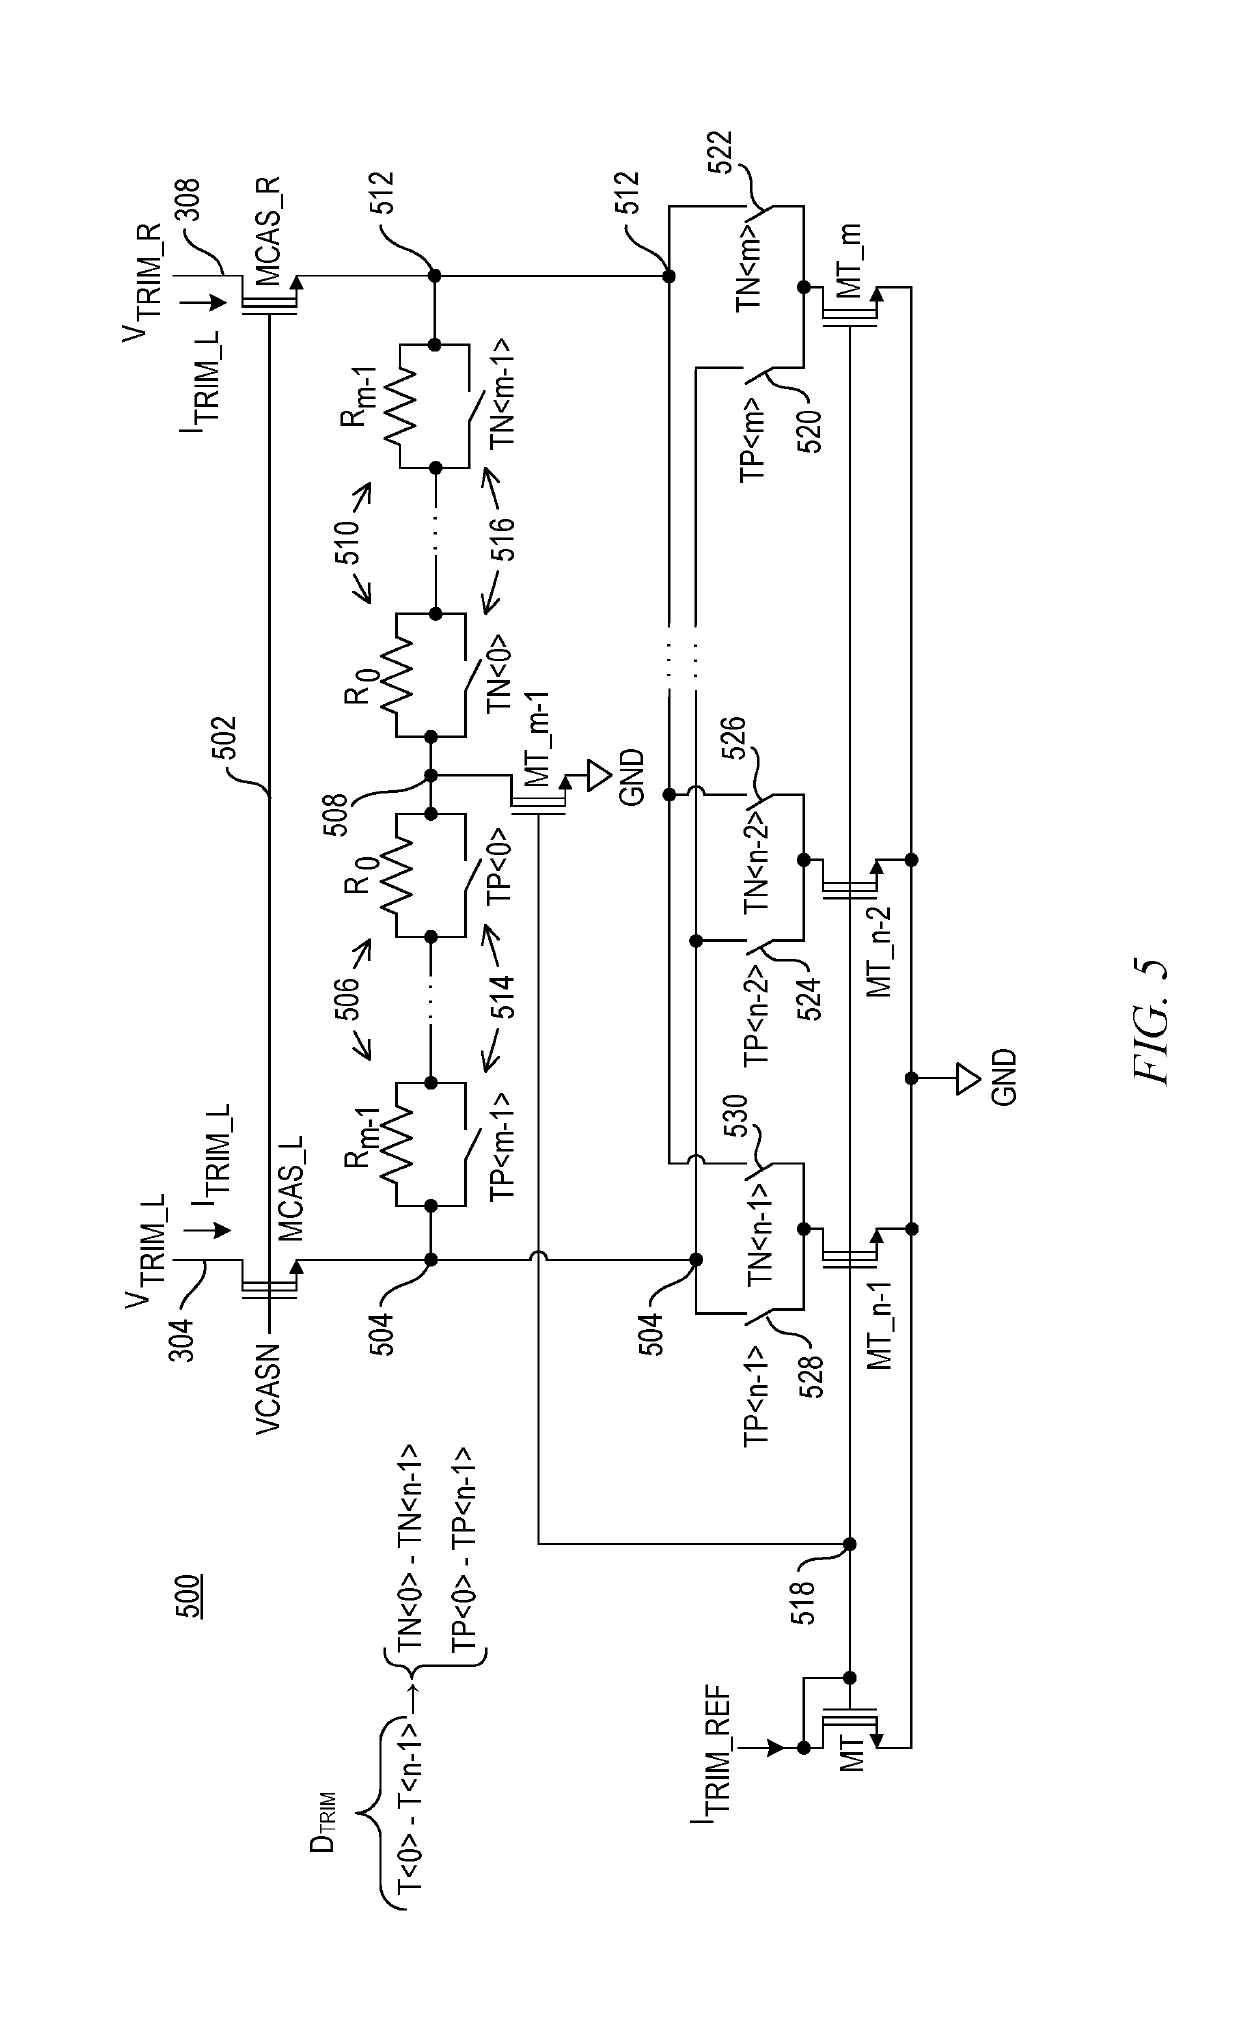 System and method for correcting offset voltage errors within a band gap circuit